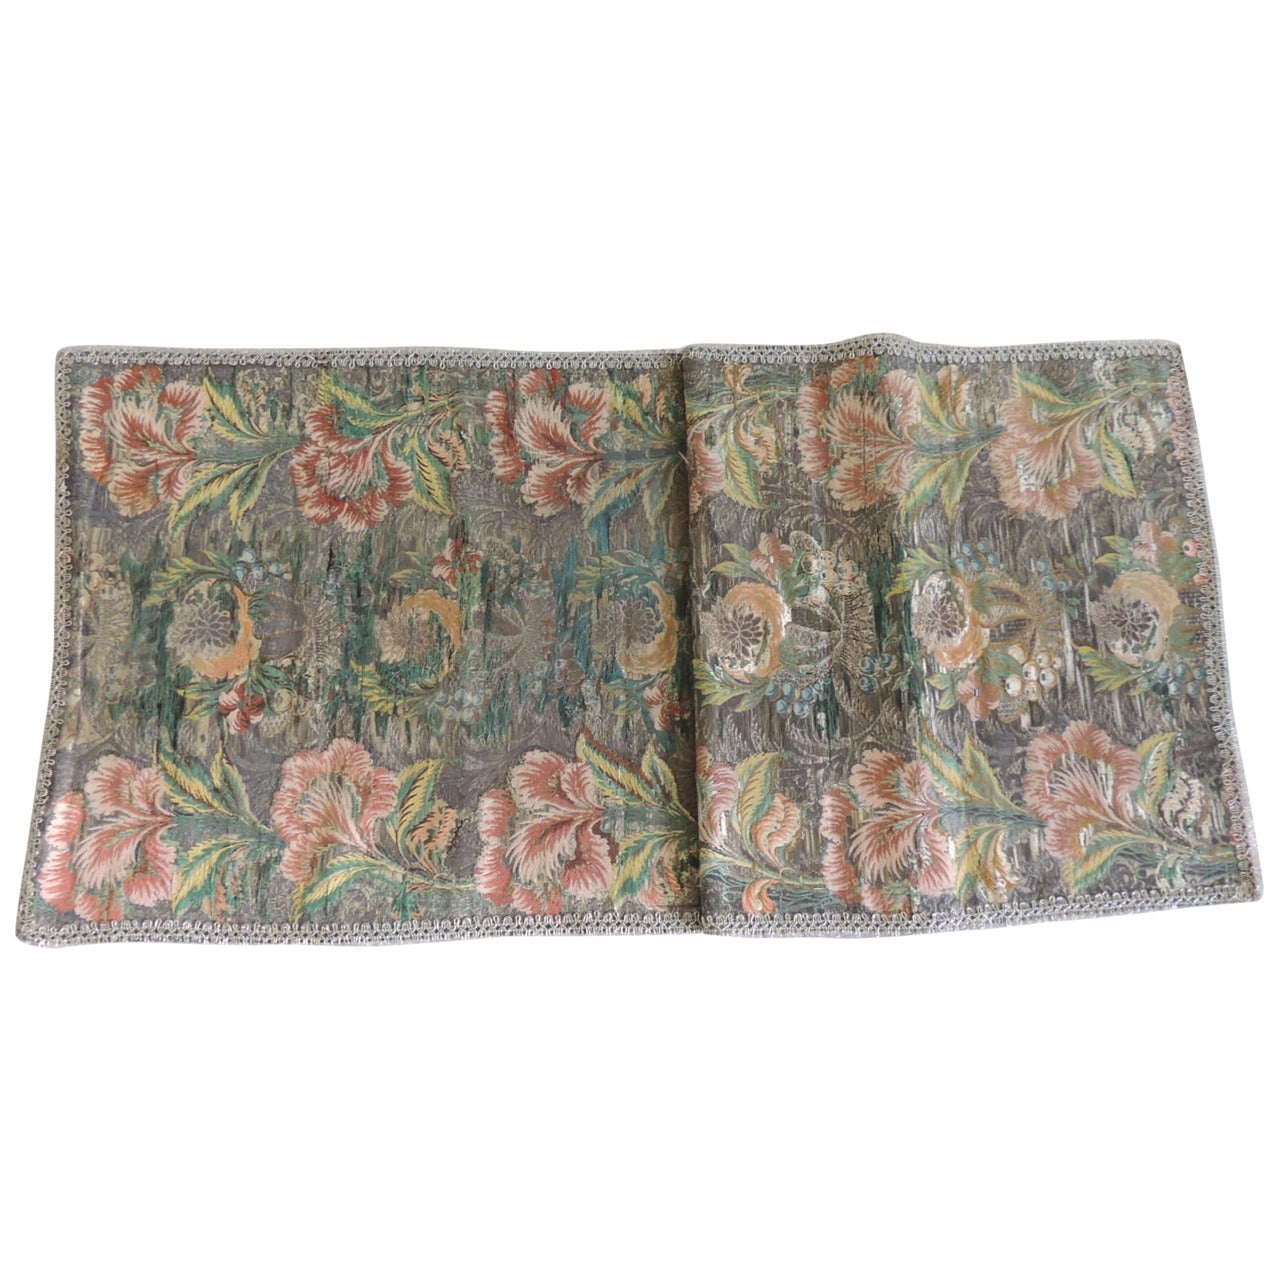 18th Century Green and Orange Woven French Silk Brocade Table Runner